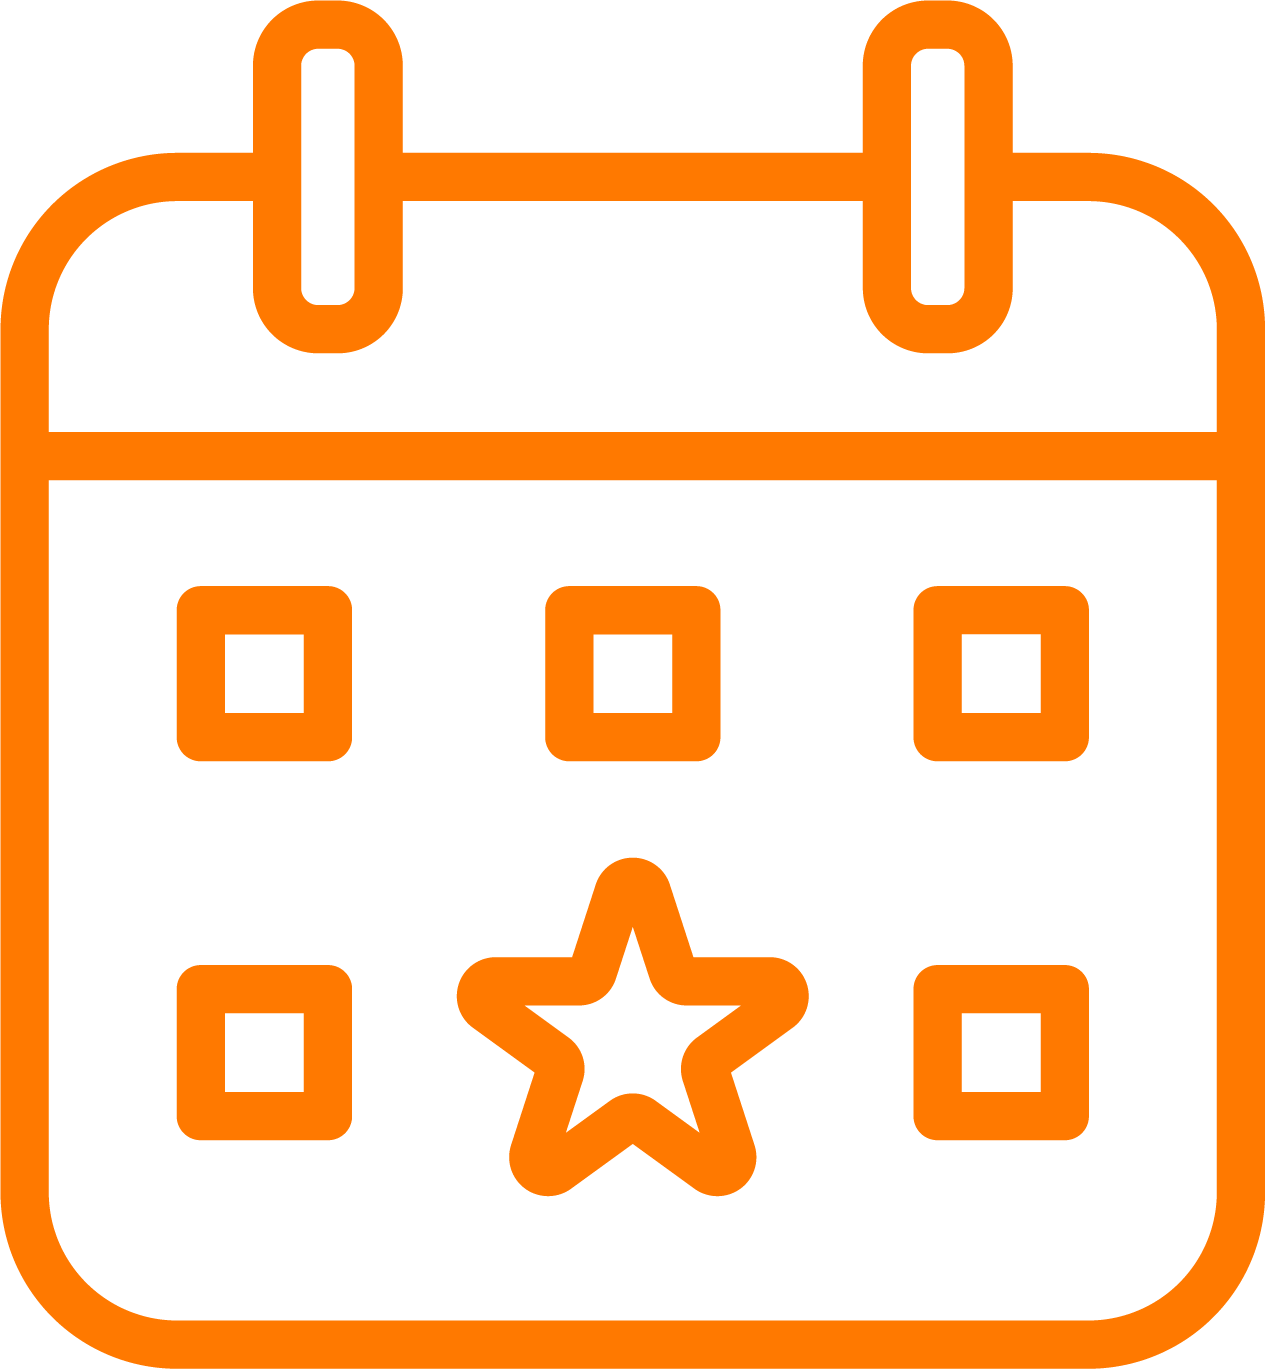 Icon of a calendar with one day starred